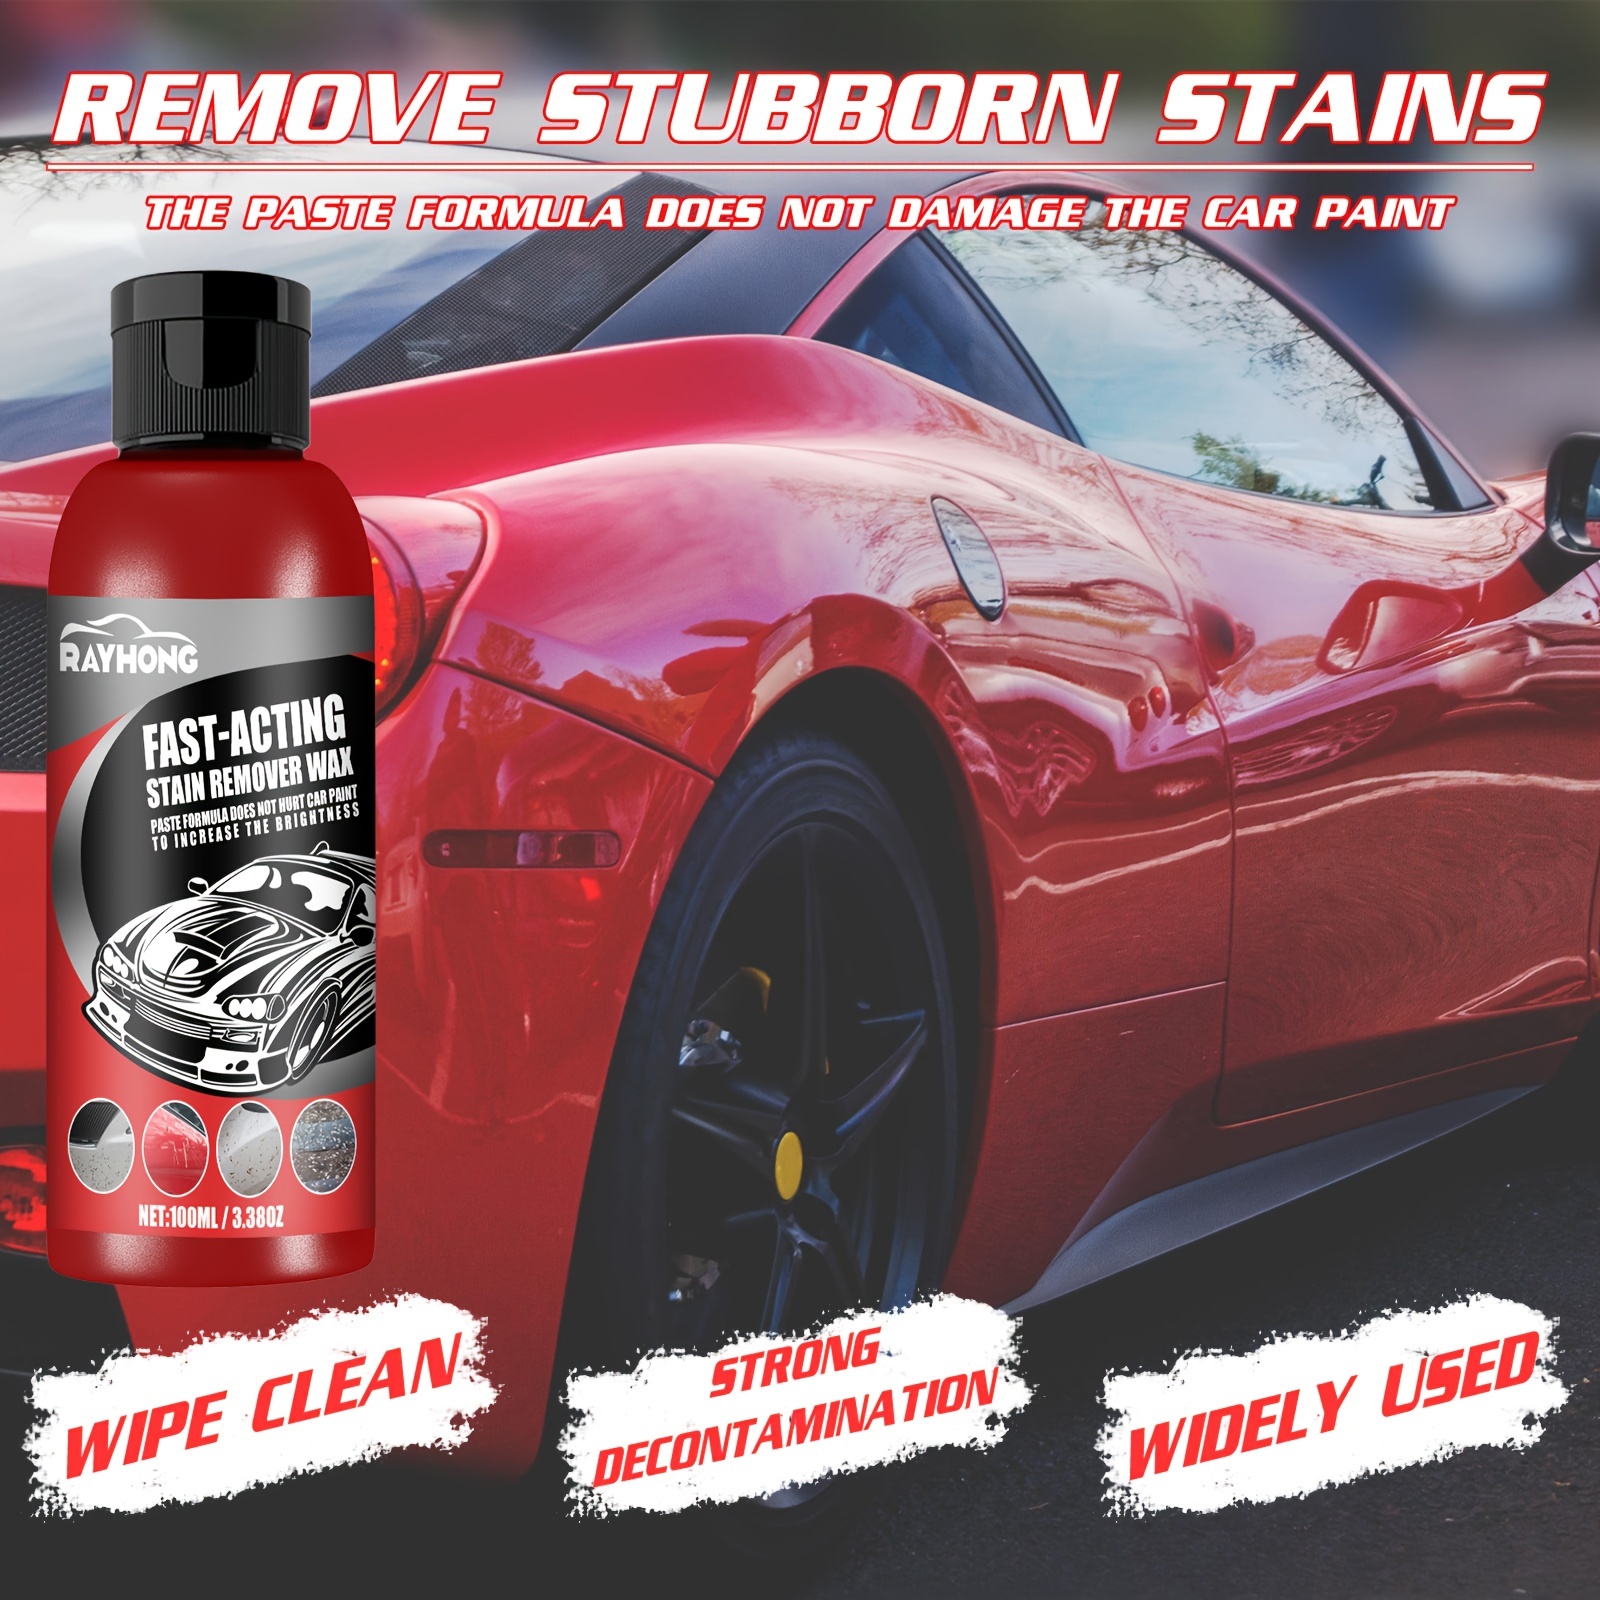 200g Universal Car Polish Wax: Make Your Car Shine & Protect it from Damage  - Round Sponge Included!